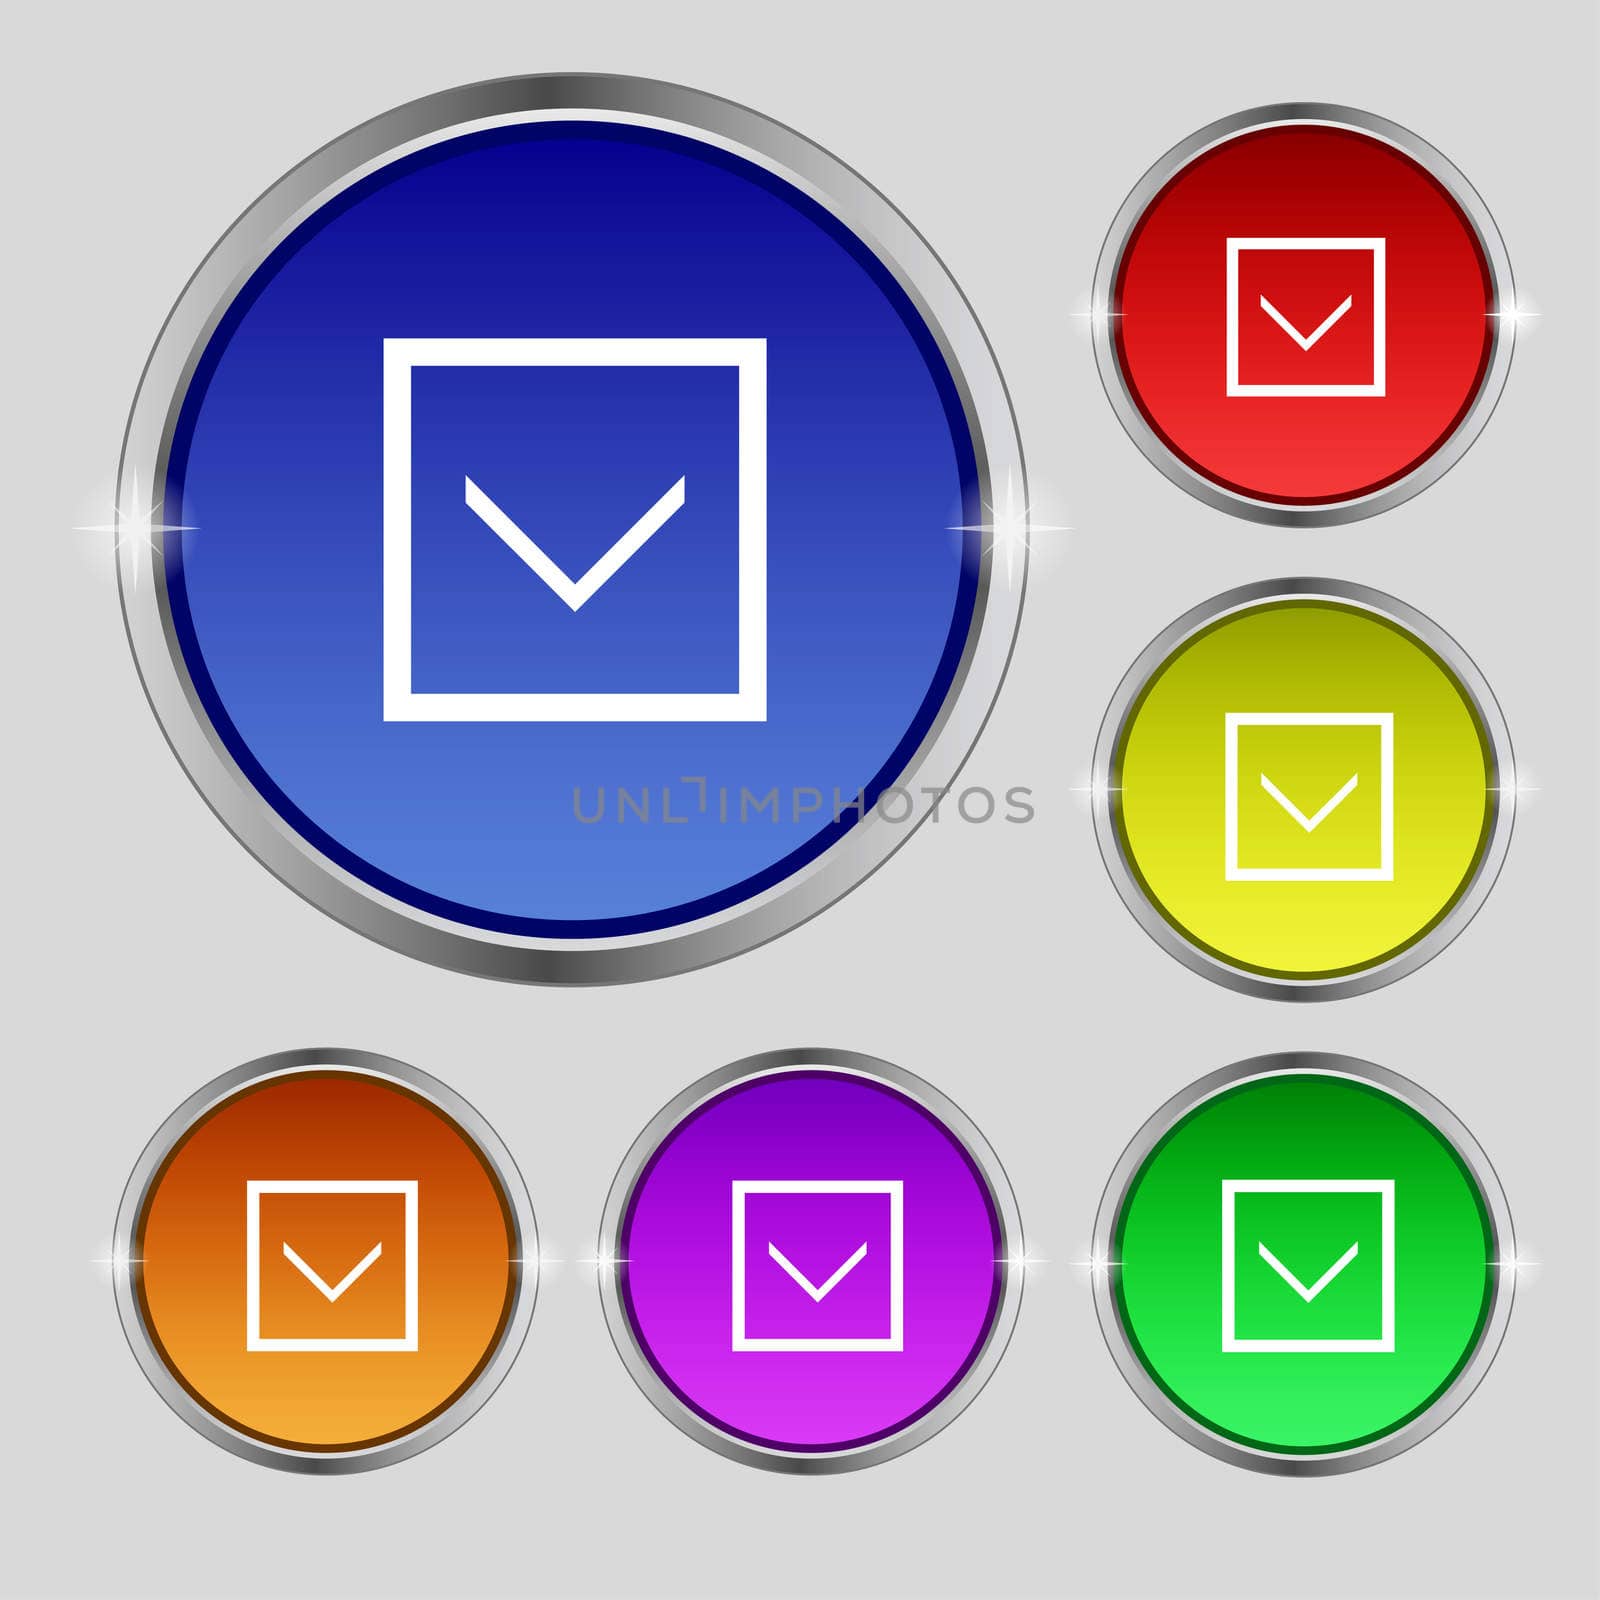 Arrow down, Download, Load, Backup icon sign. Round symbol on bright colourful buttons. illustration